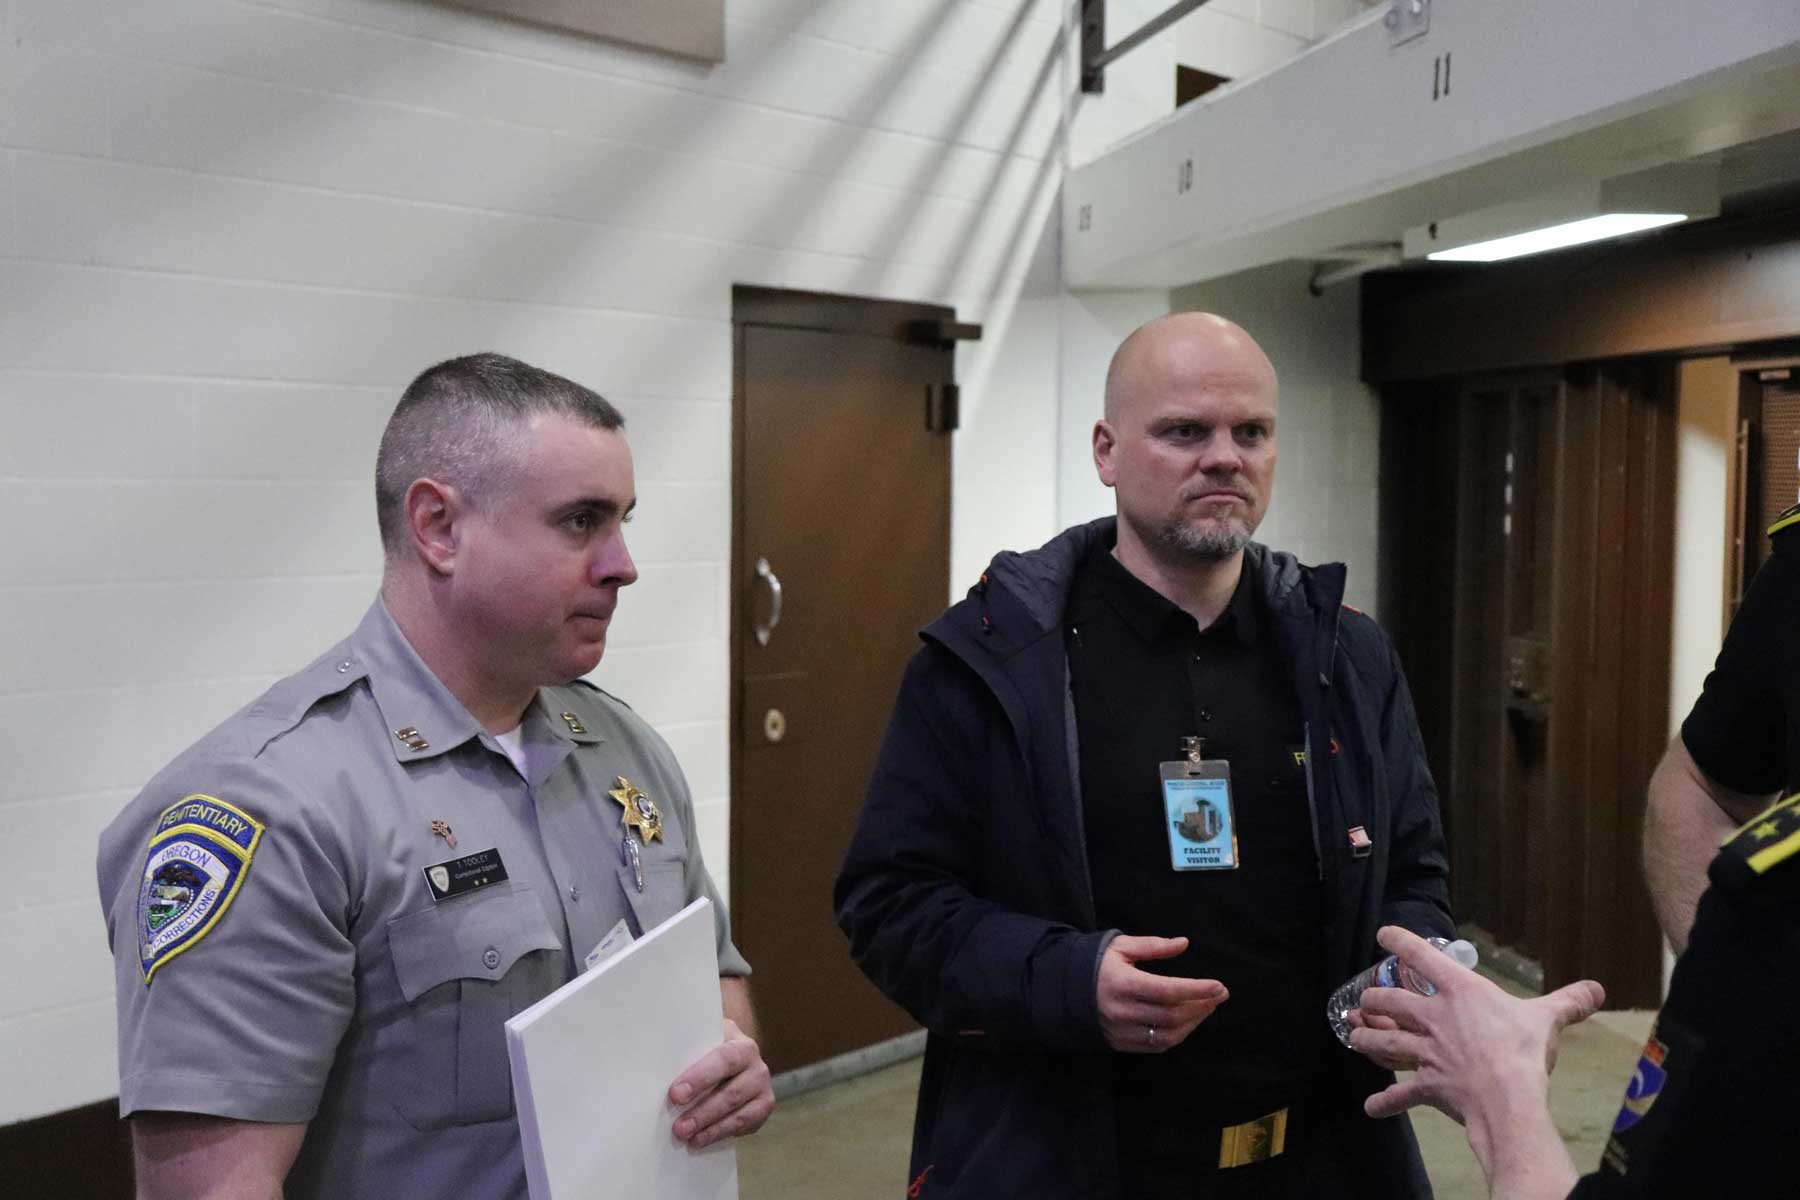 Toby Tooley, a former prison captian, wears his officer uniform as he stands with members of the Norwegian Correctional Service team inside a prison.